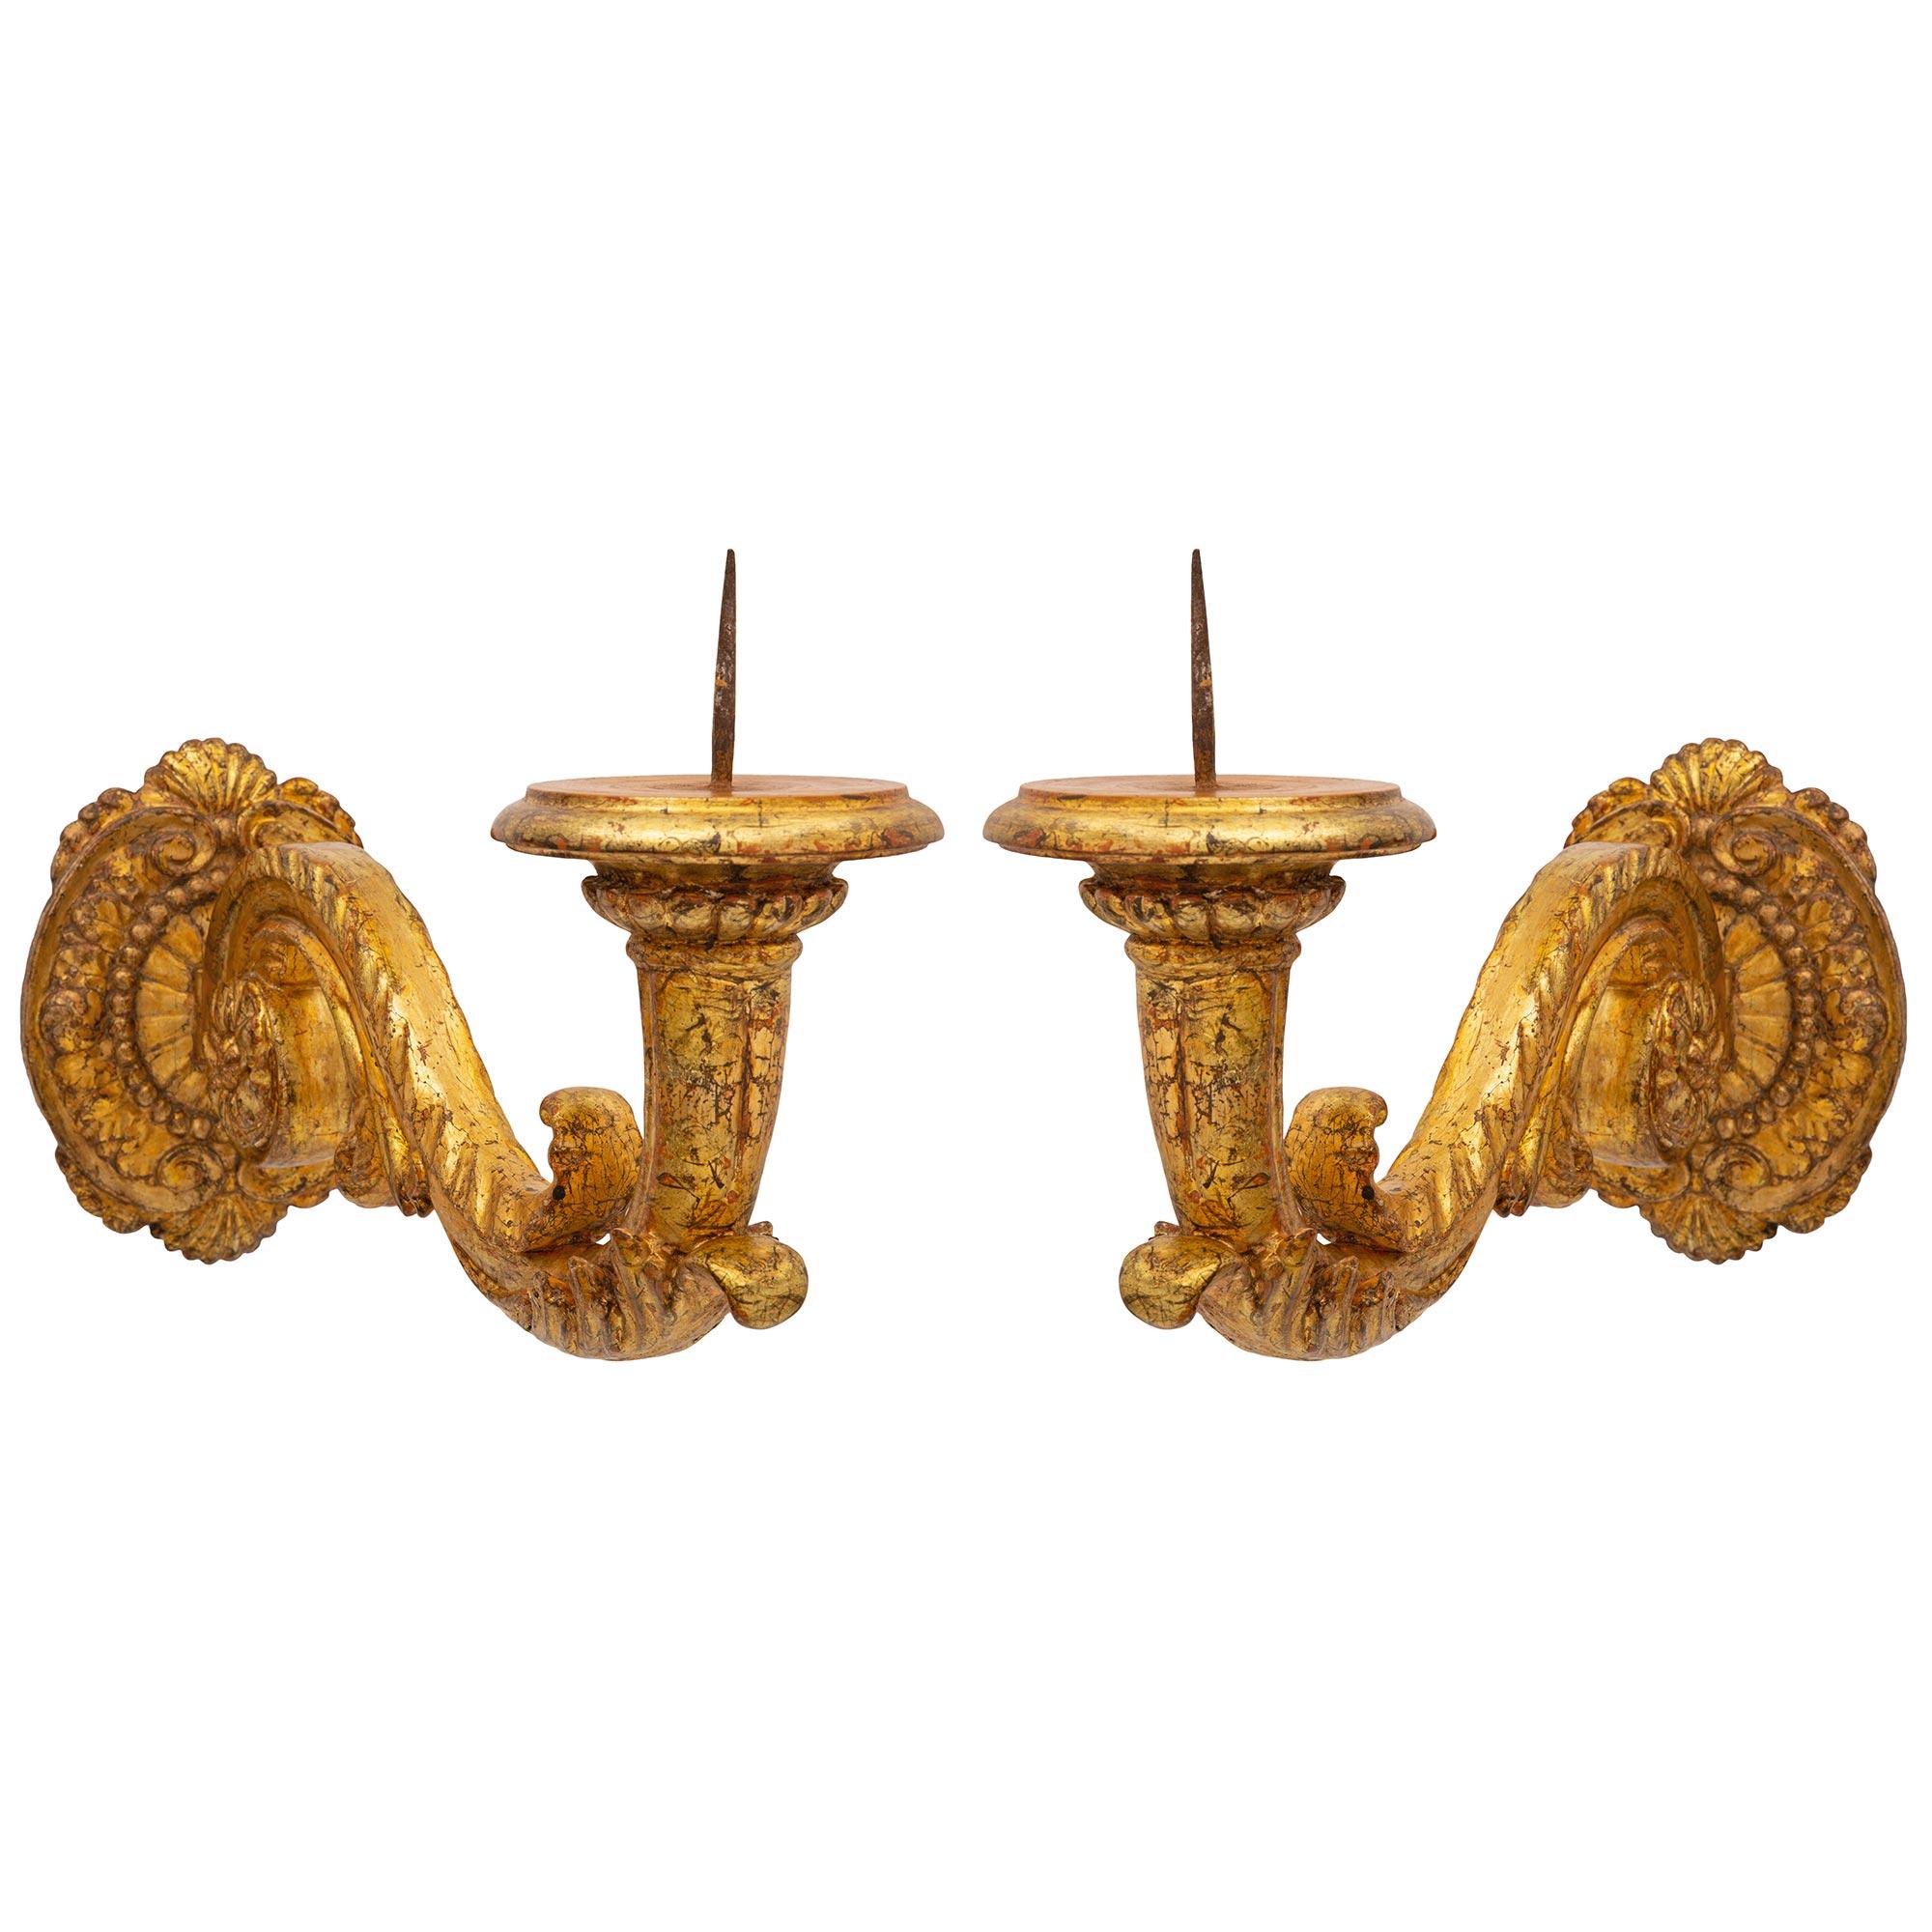 A handsome pair of Italian 19th century mecca bras de lumière sconces. Each impressive Bras de Lumière sconce is centered by a beautiful foliate backplate with lovely seashell reserves and a fine wrap around band. The elegantly scrolled arms are